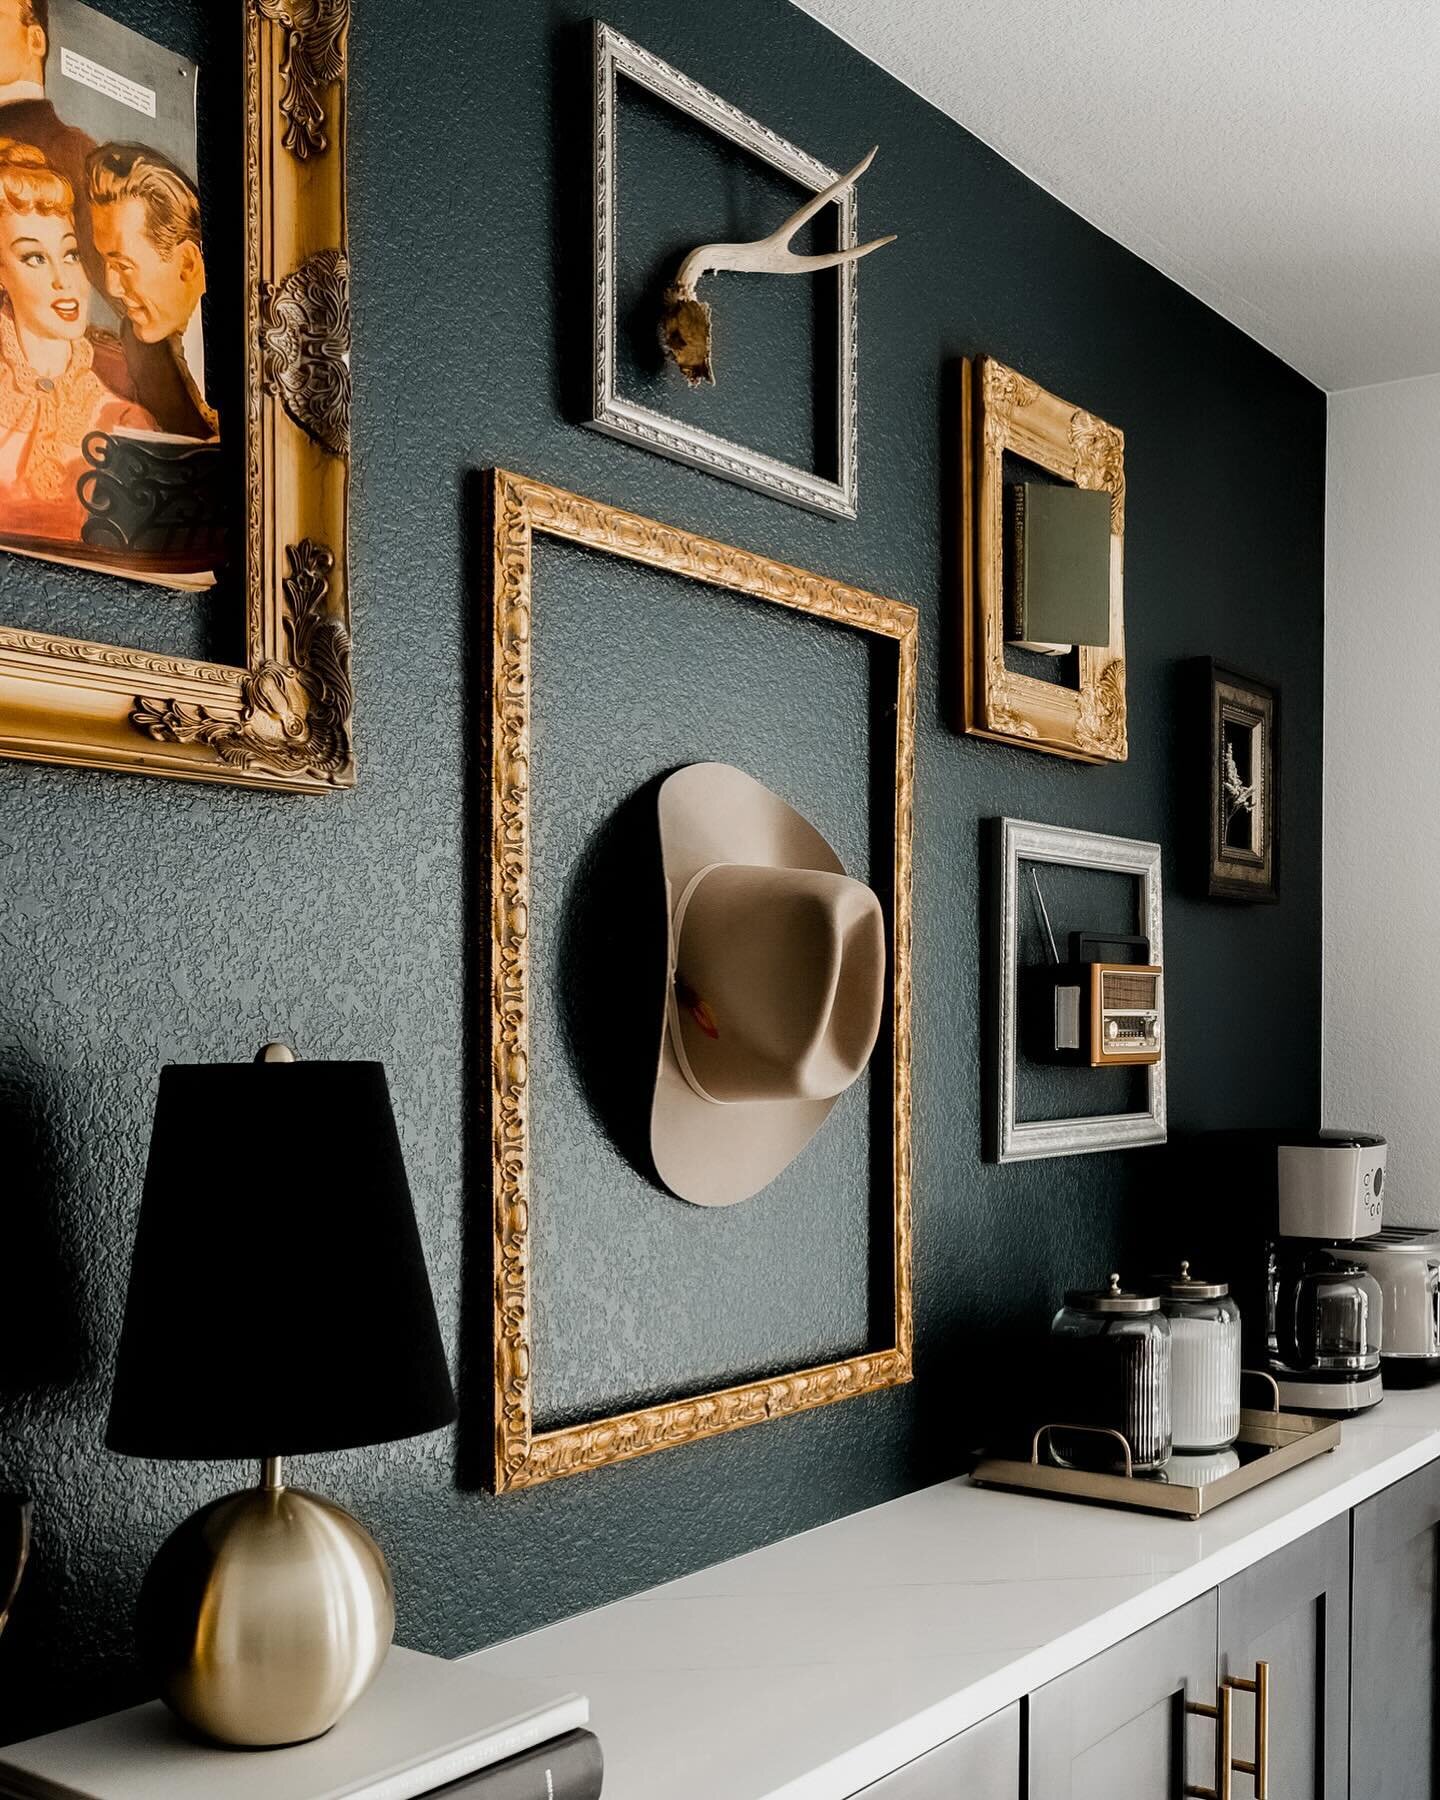 2D art is great and all&hellip; butttt, this fun 3D gallery wall full of ornate frames and enchanting objects make for a bold statement over this coffee bar 🤗 What do you guys think?!